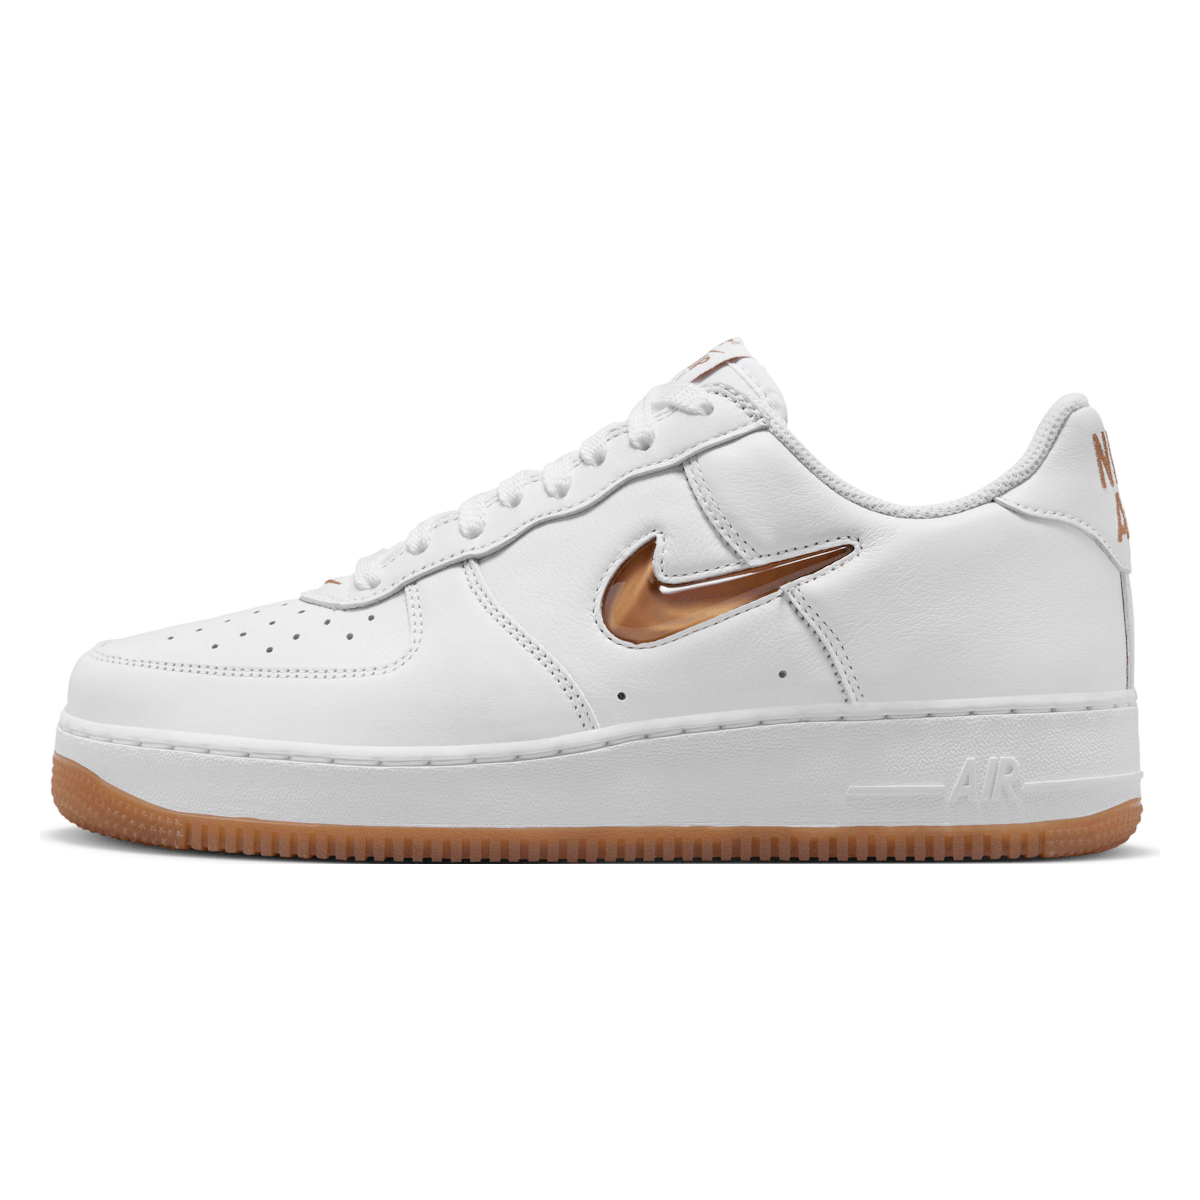 Nike Air Force 1 Low Retro Color of the Month "White"